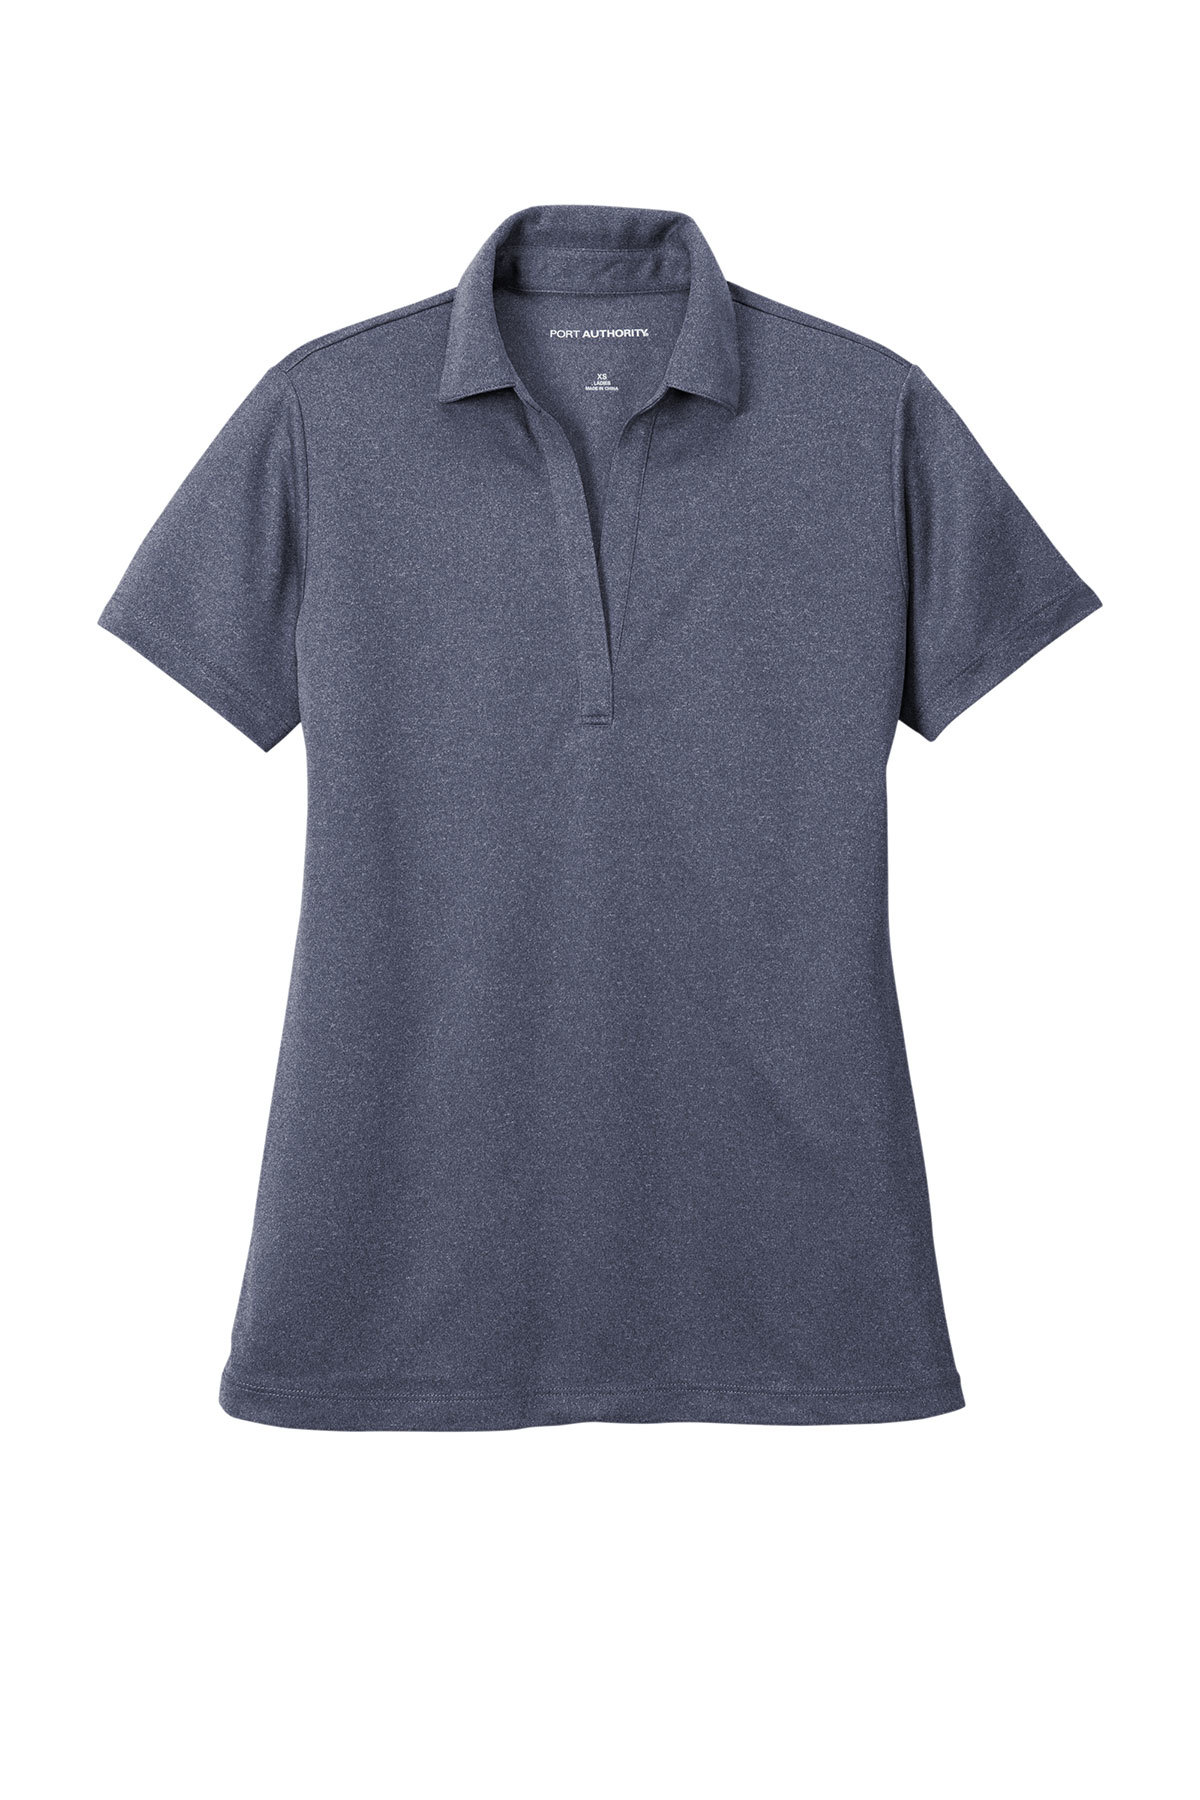 Port Authority Ladies Heathered Silk Touch Performance Polo, Product